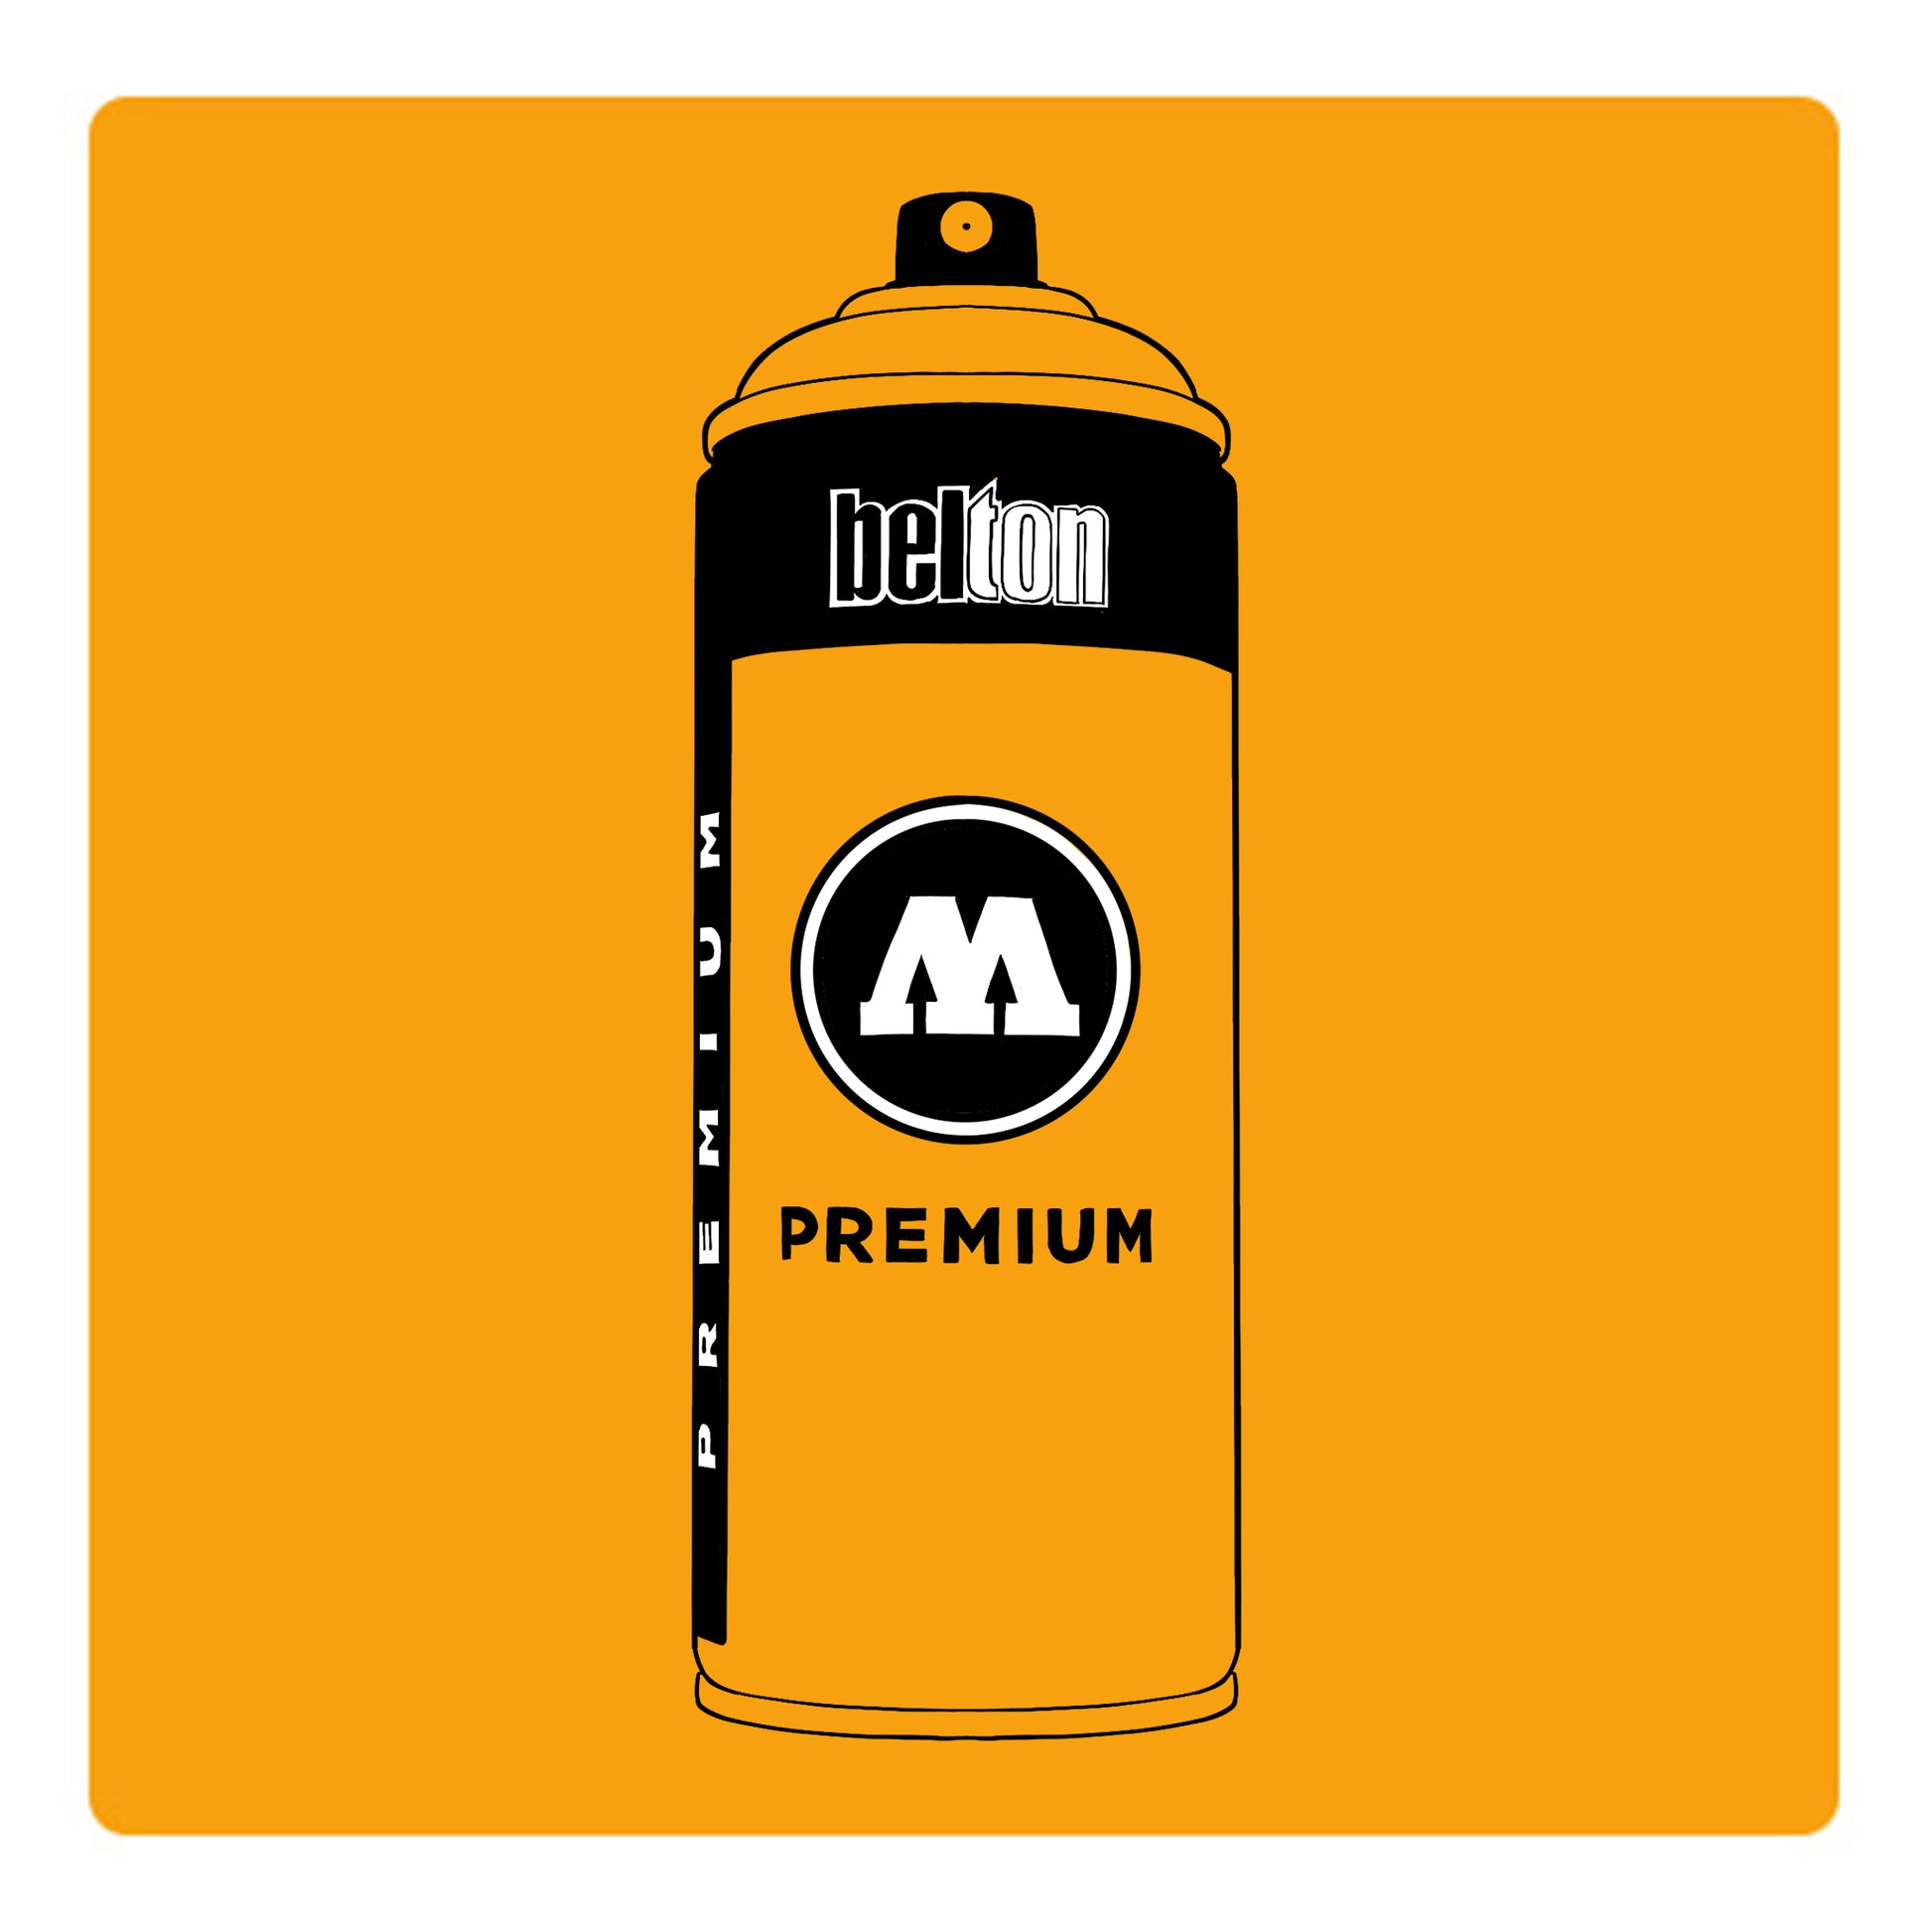 A black outline drawing of a mango yellow spray paint can with the words "belton","premium" and the letter"M" written on the face in black and white font. The background is a color swatch of the same mango yellow with a white border.